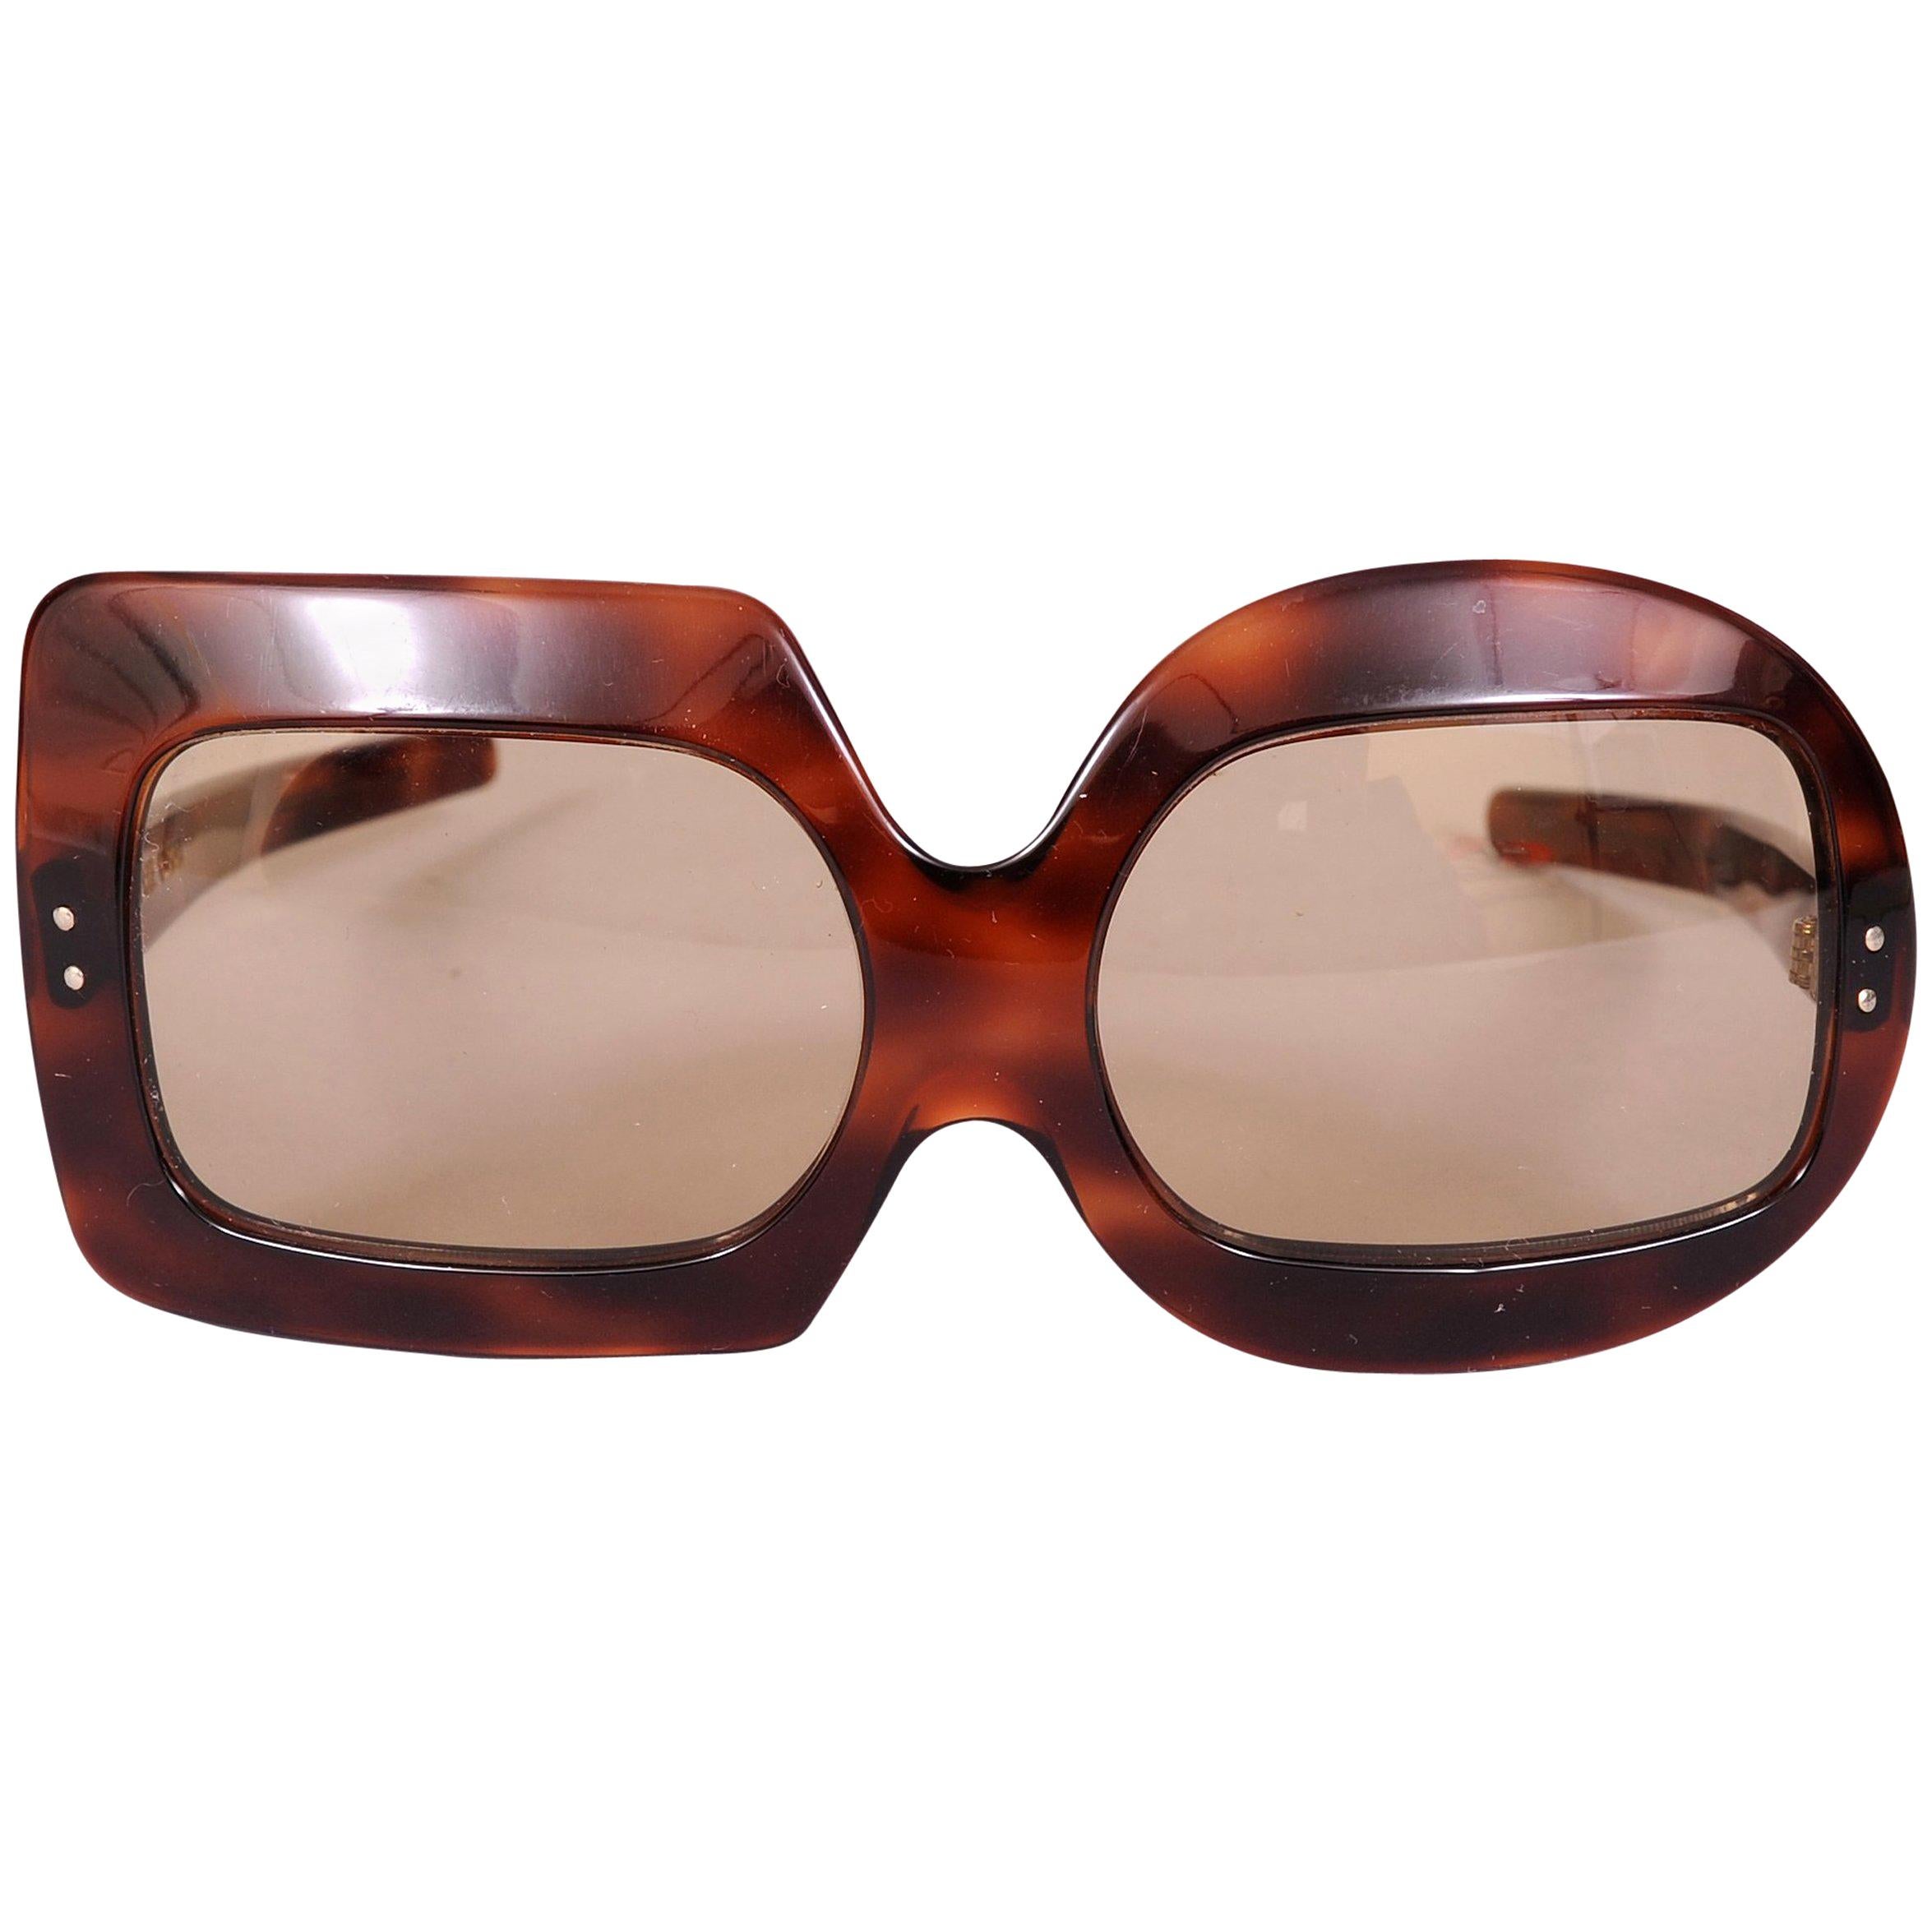 Pierre Cardin Vintage Tortoise Sunglasses with Whimsical Square and Round Lenses